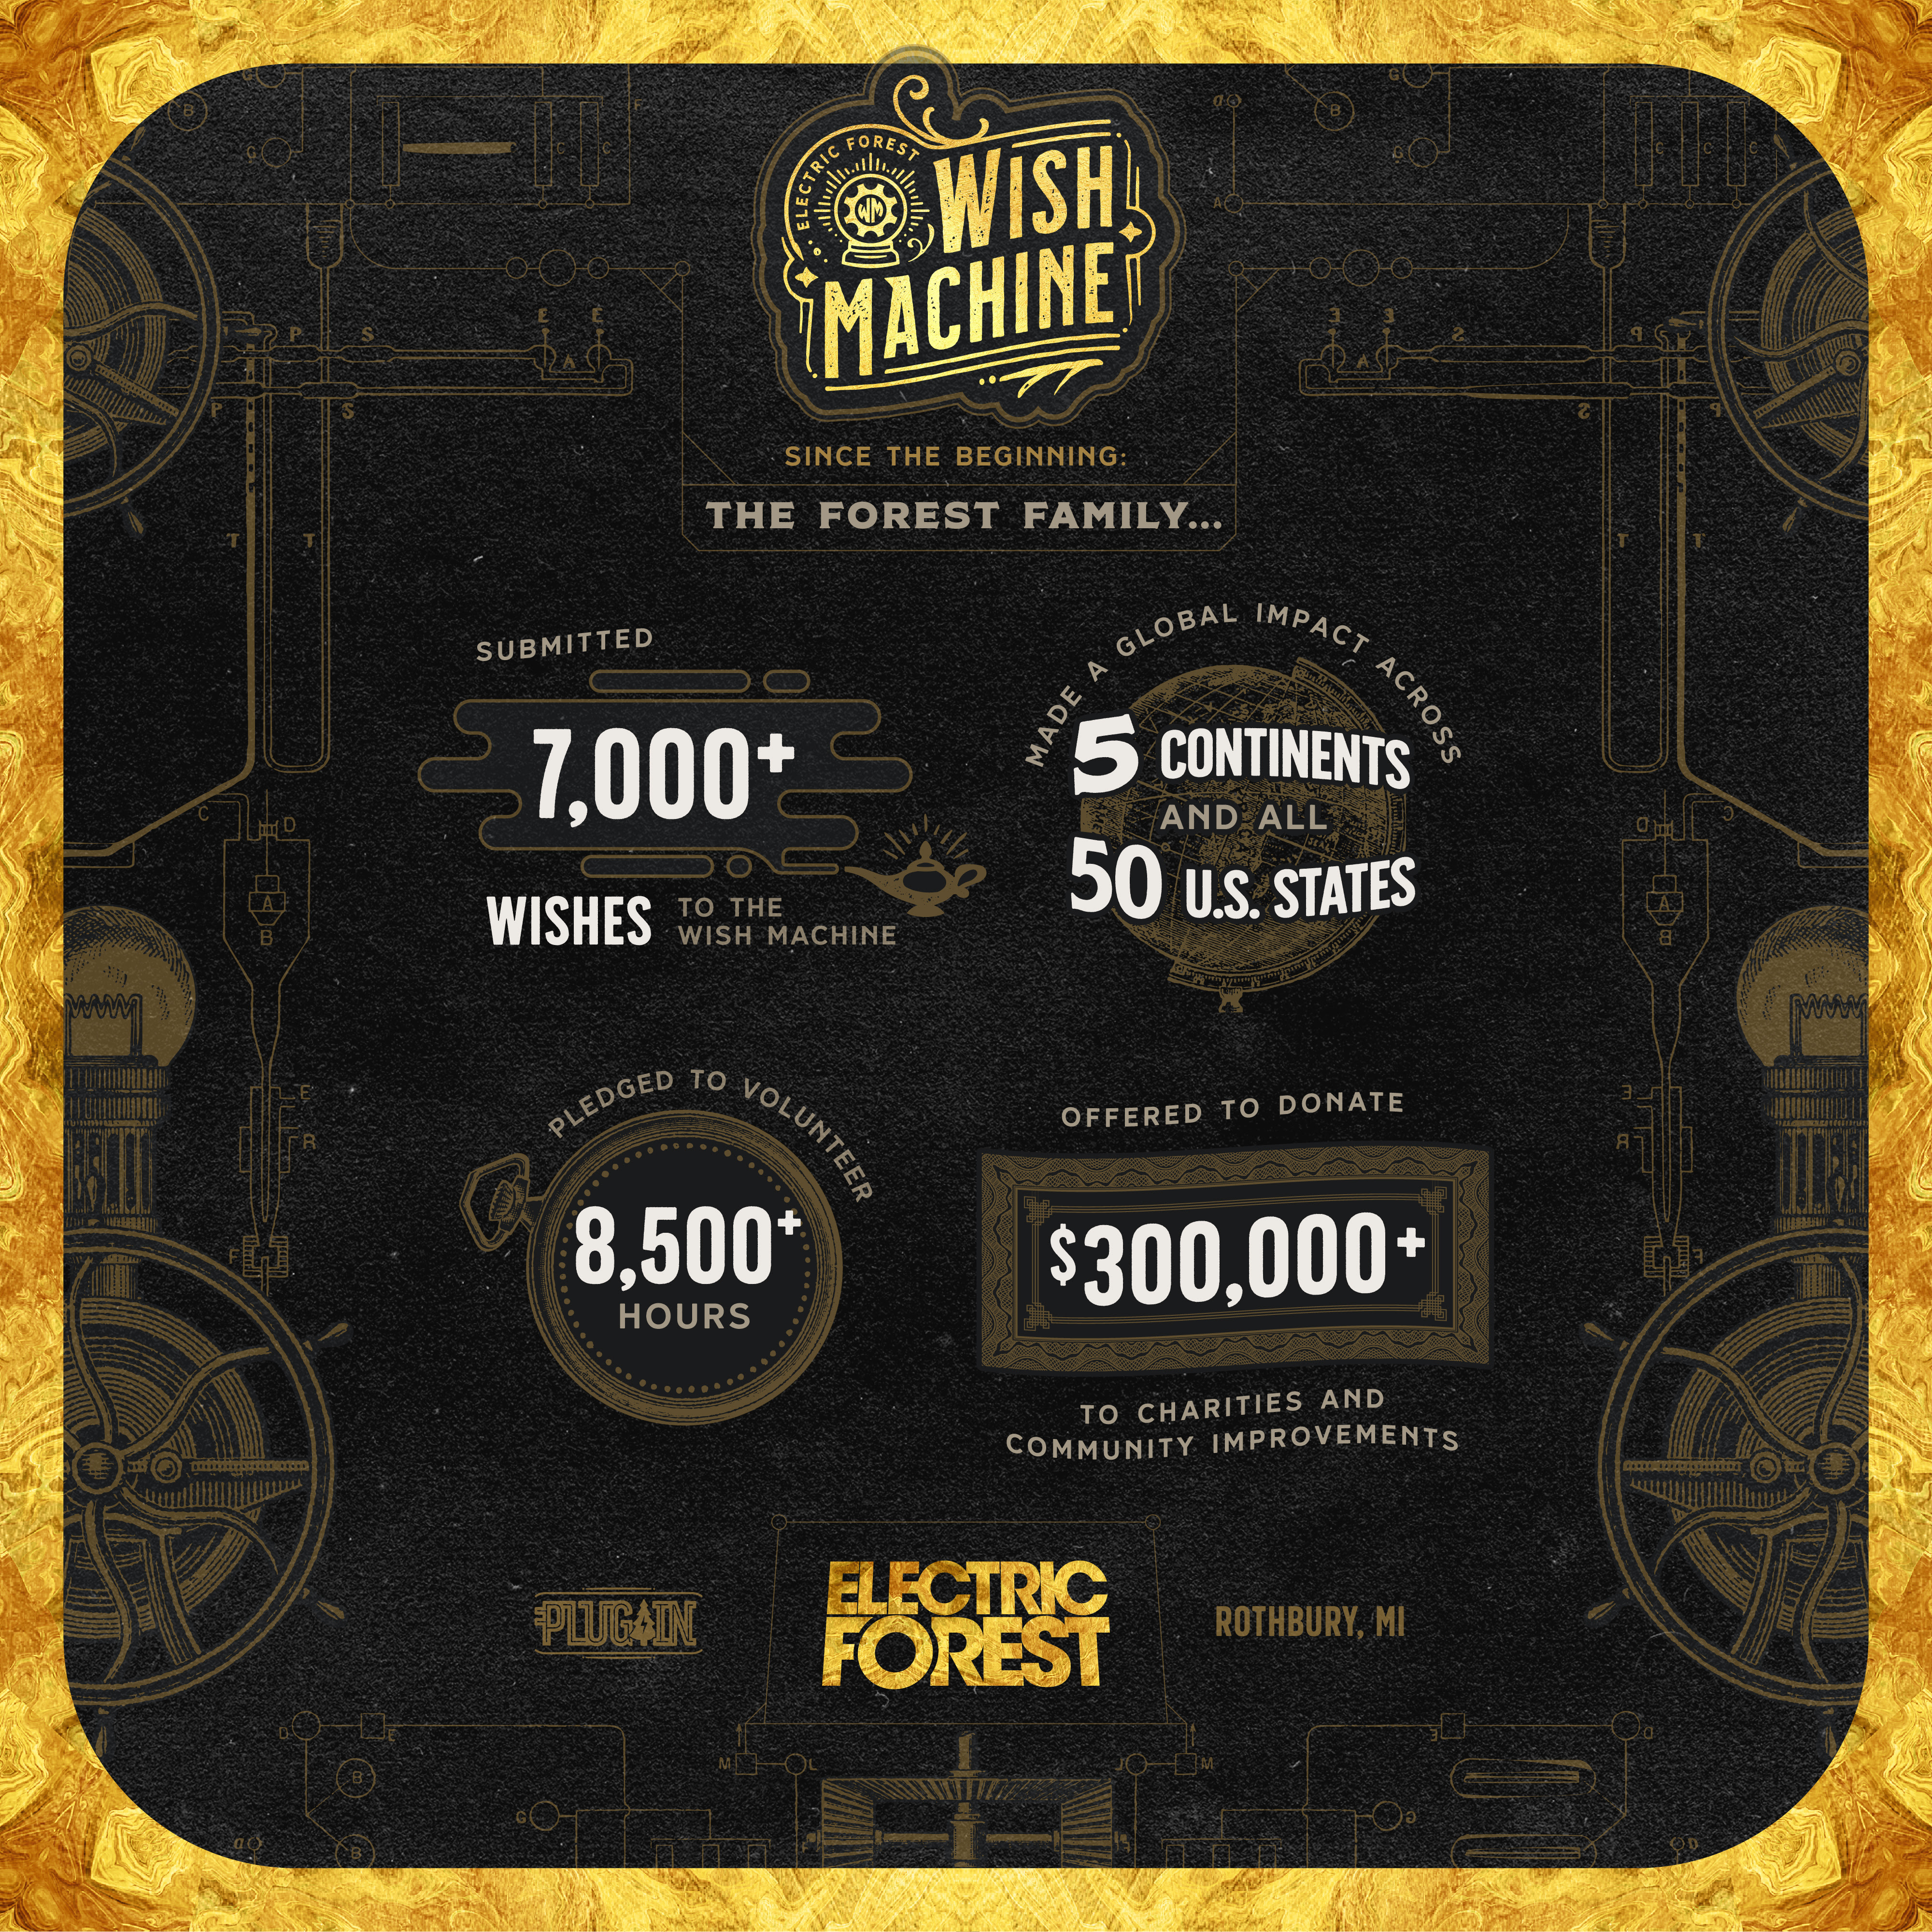 Electric Forest Has Just Launched Their 2020 Wish Machine